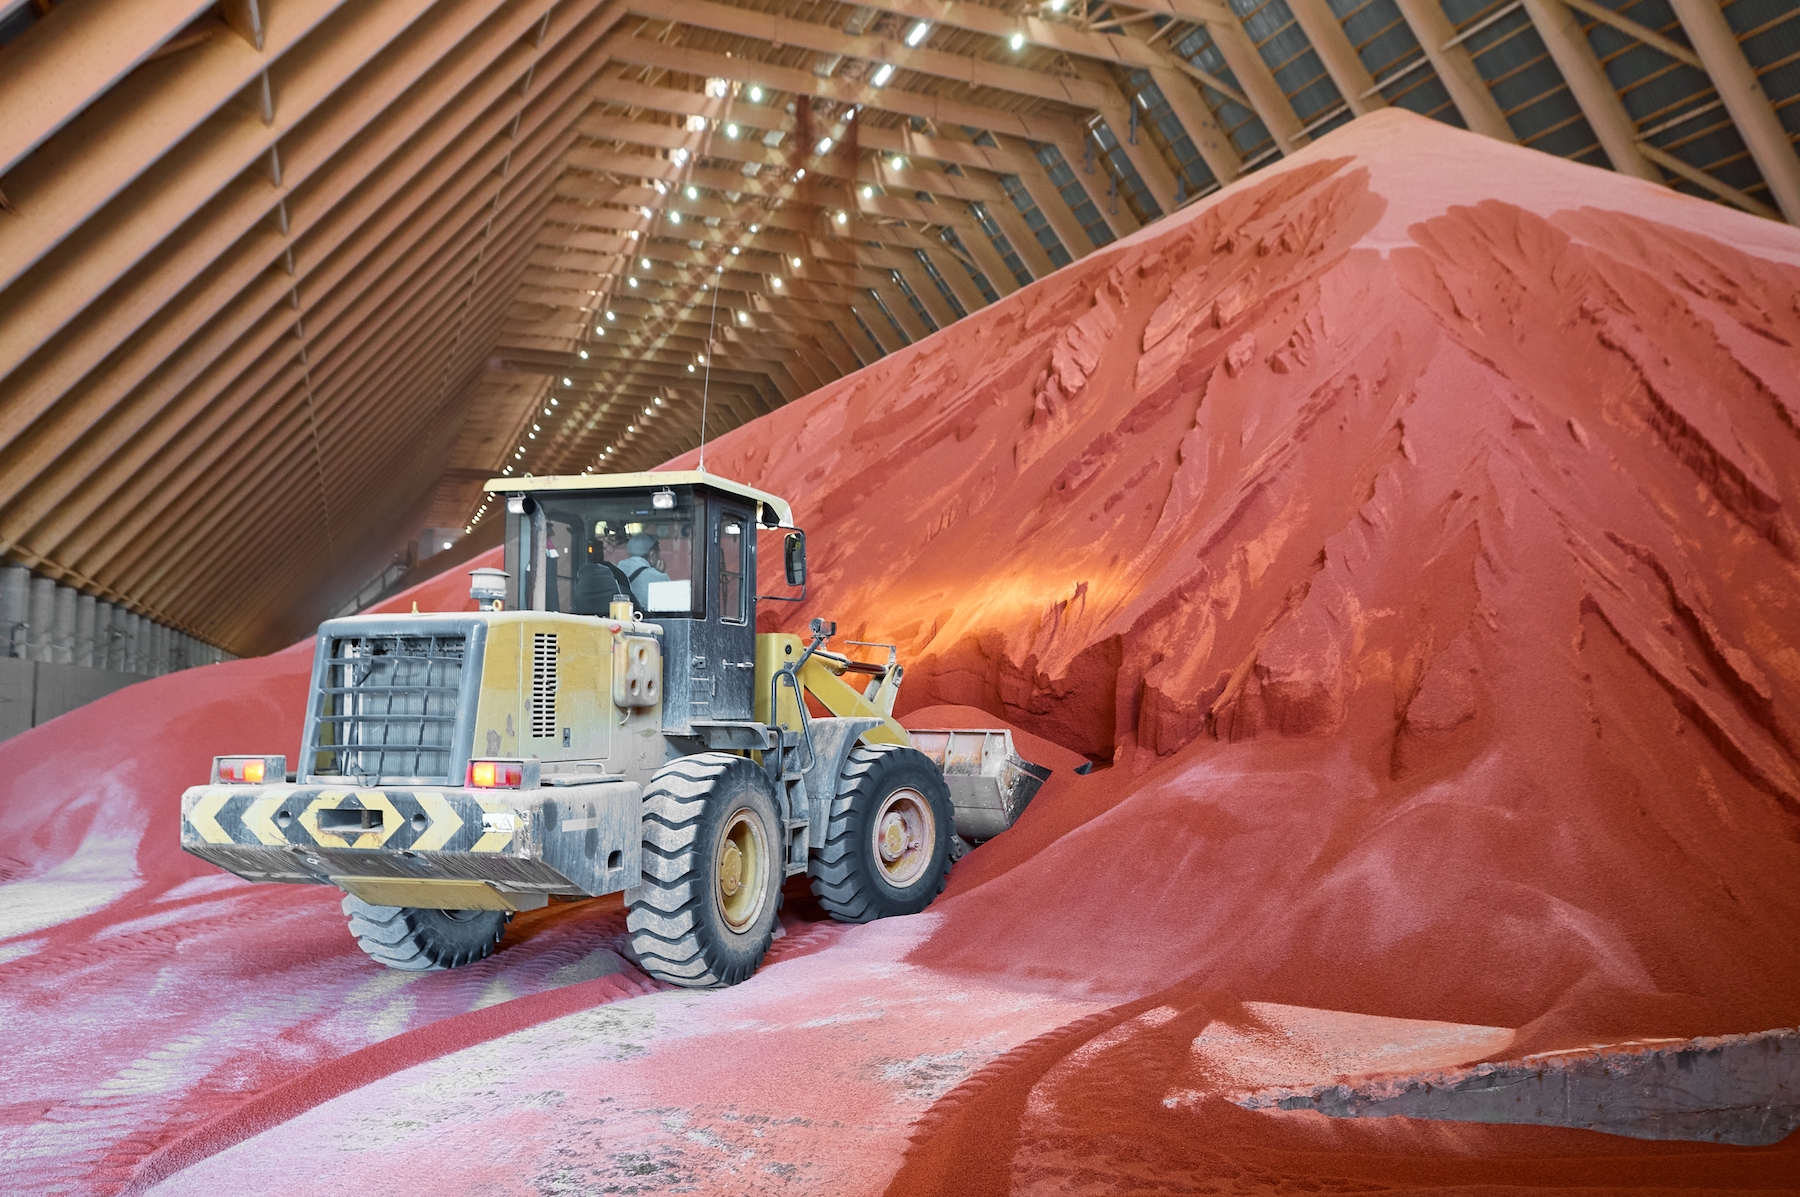 Earth moving equipment in a mine warehouse moves red coloured material